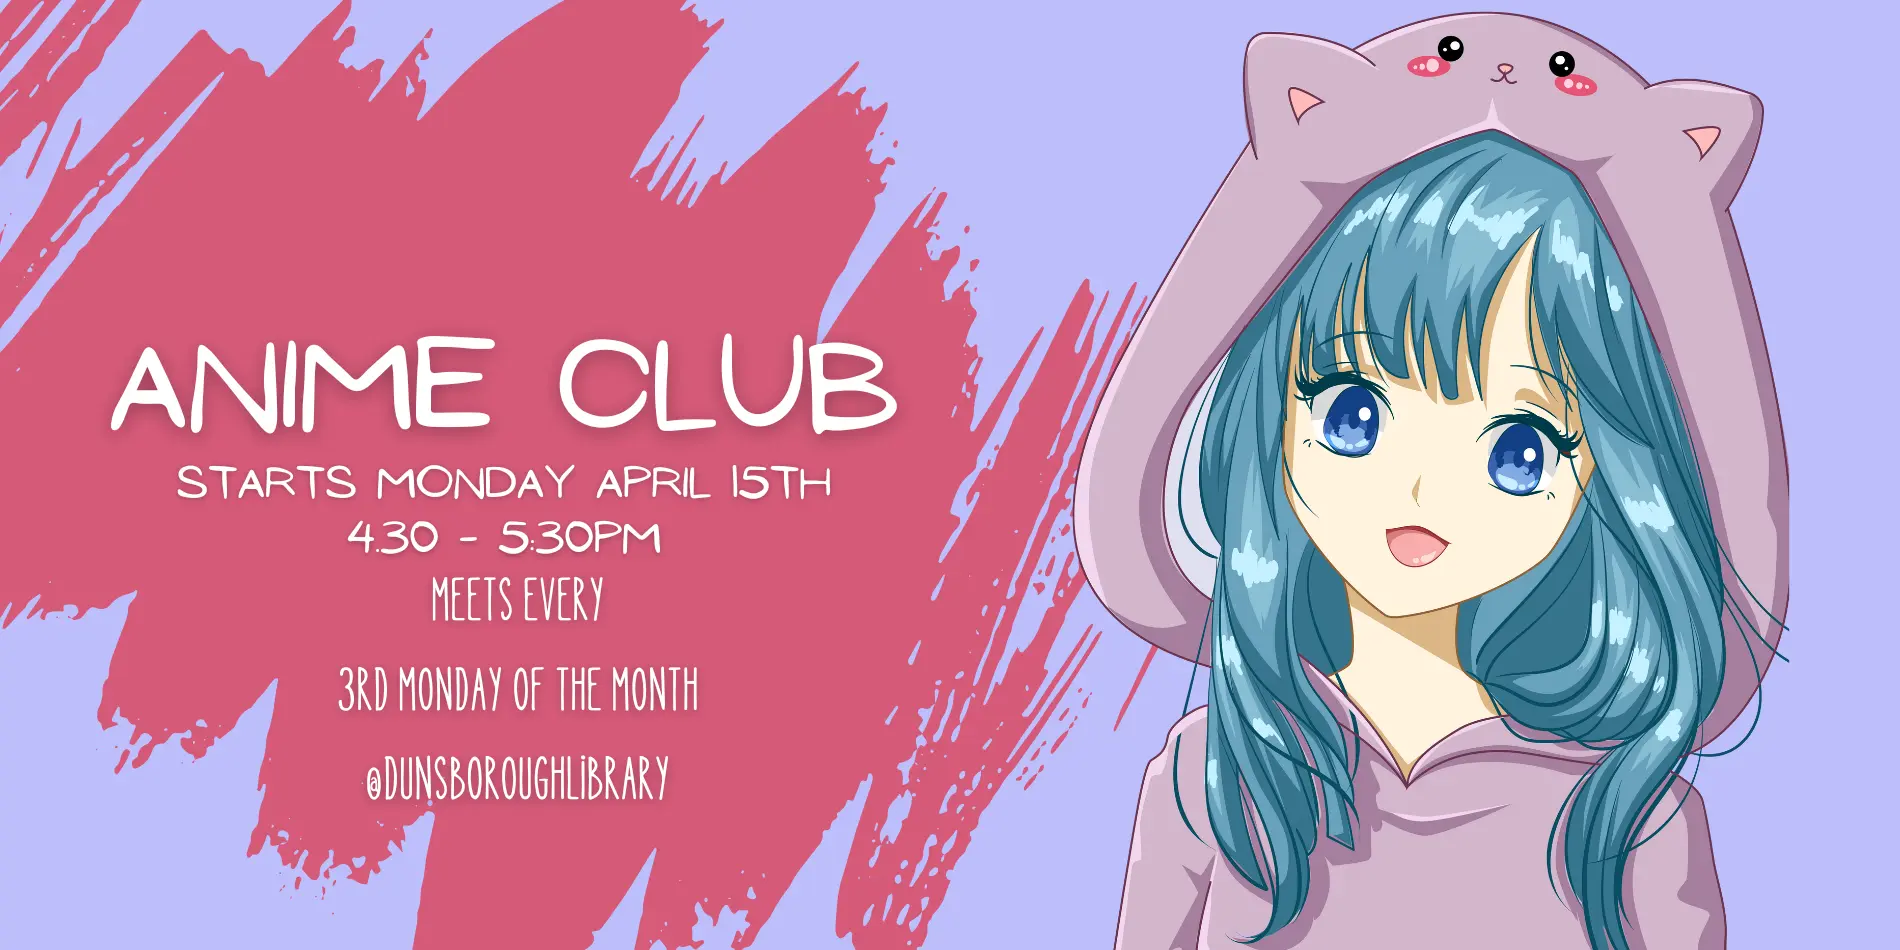 Anime Club at Dunsborough Library starts on the 15th of April, and will be held on the 3rd monday of each month.